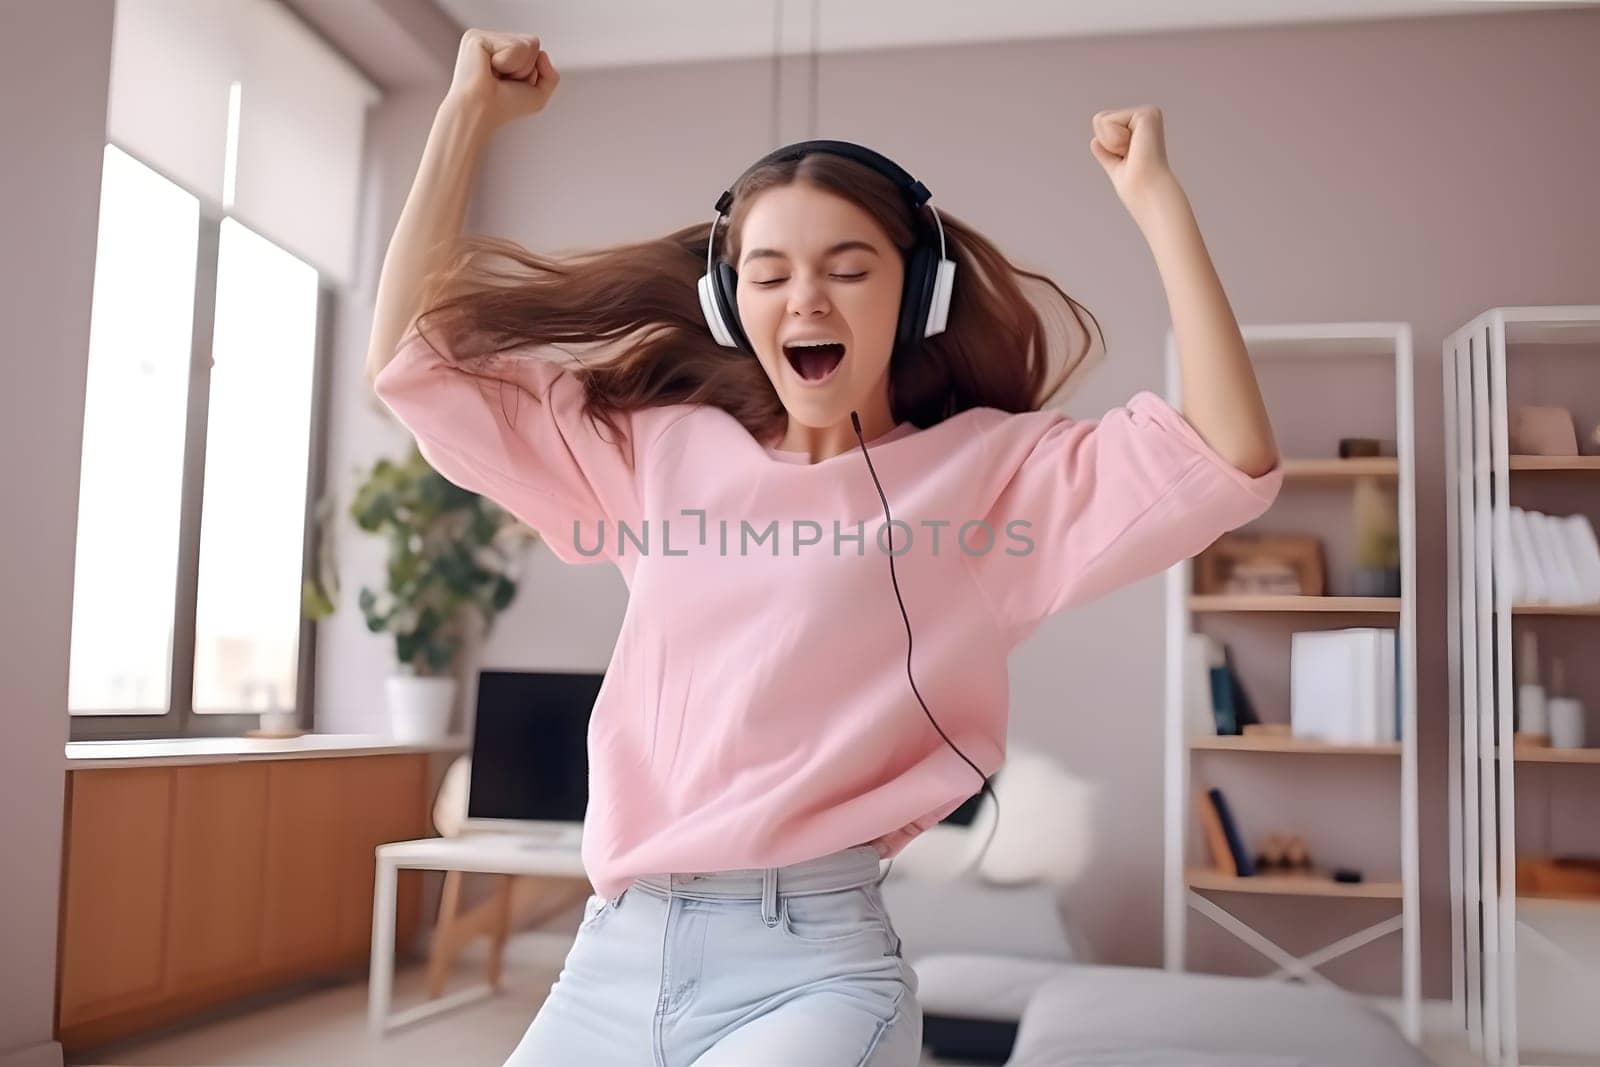 Overjoyed millennial girl wearing wired headphones having fun with music. Neural network generated in may 2023. Not based on any actual person, scene or pattern.